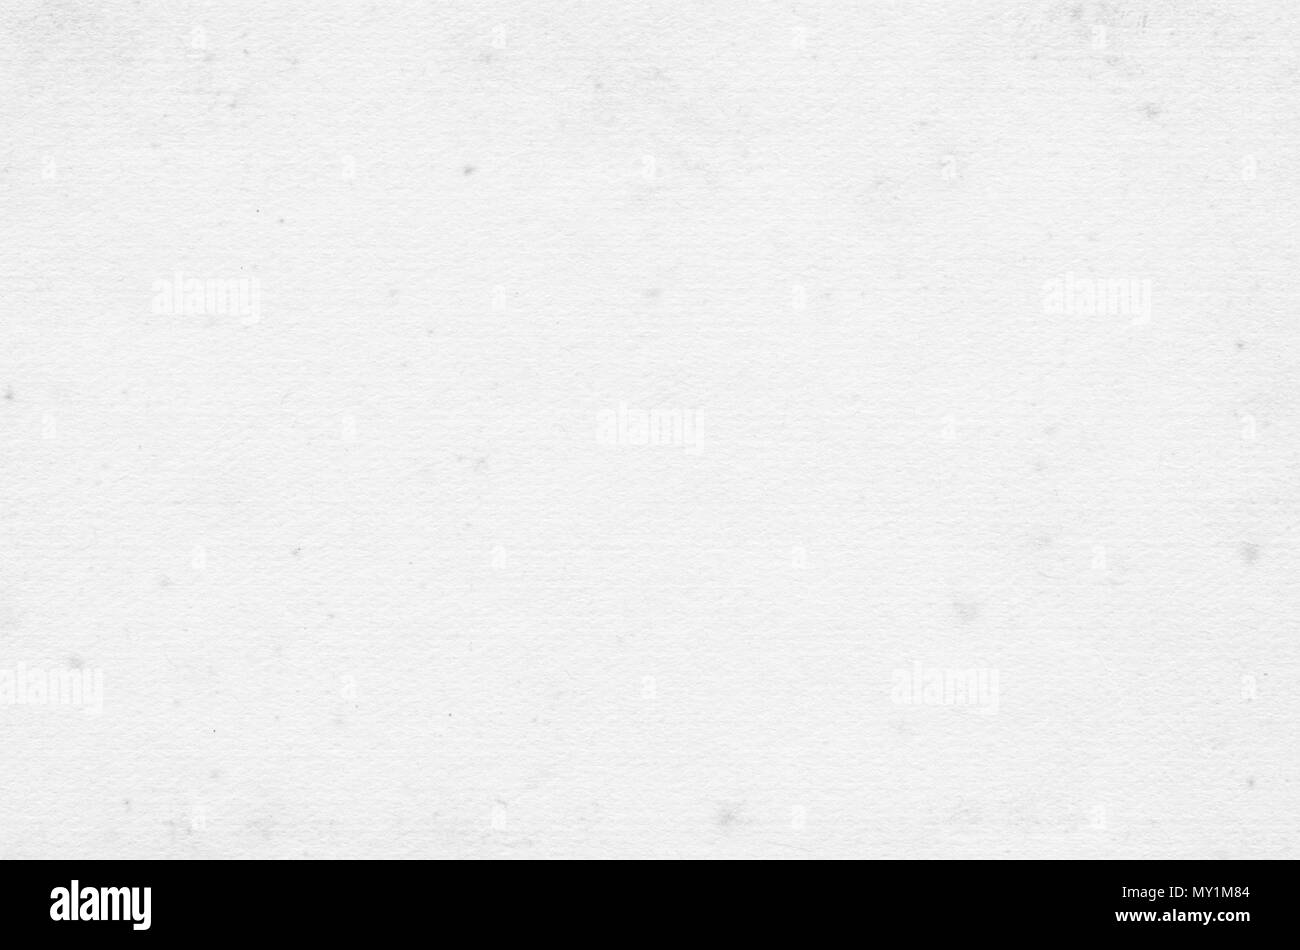 White horizontal rough grainy note paper texture, light background for text. Stock Photo